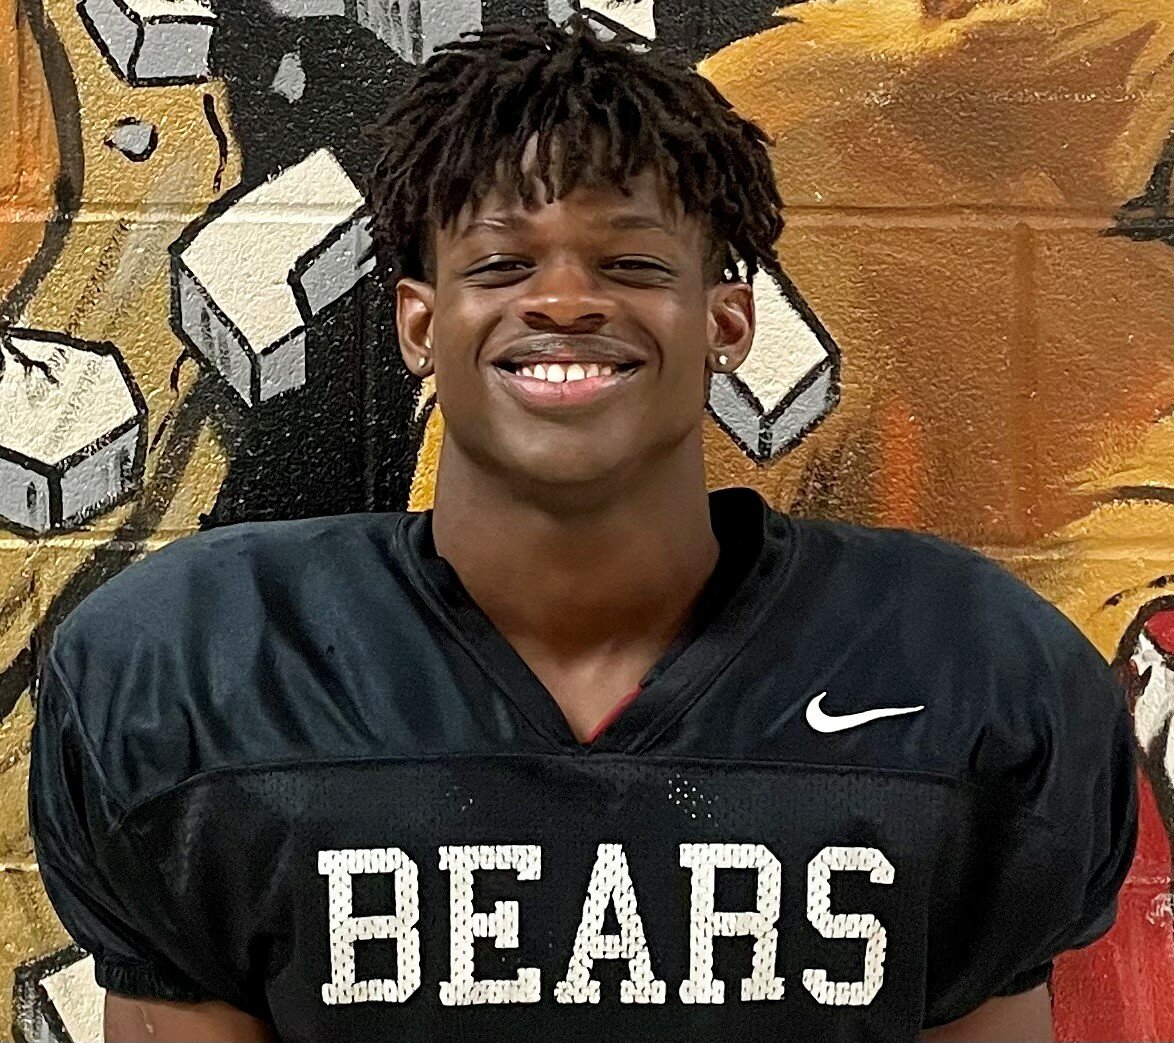 In a win over county rival Pine Forest, last season’s top Gray's Creek rusher, Javon Webb racked up almost a third of the total yards he compiled a year ago, rushing 31 times for 310 yards and scoring four touchdowns in the Bears’ 56-35 win.